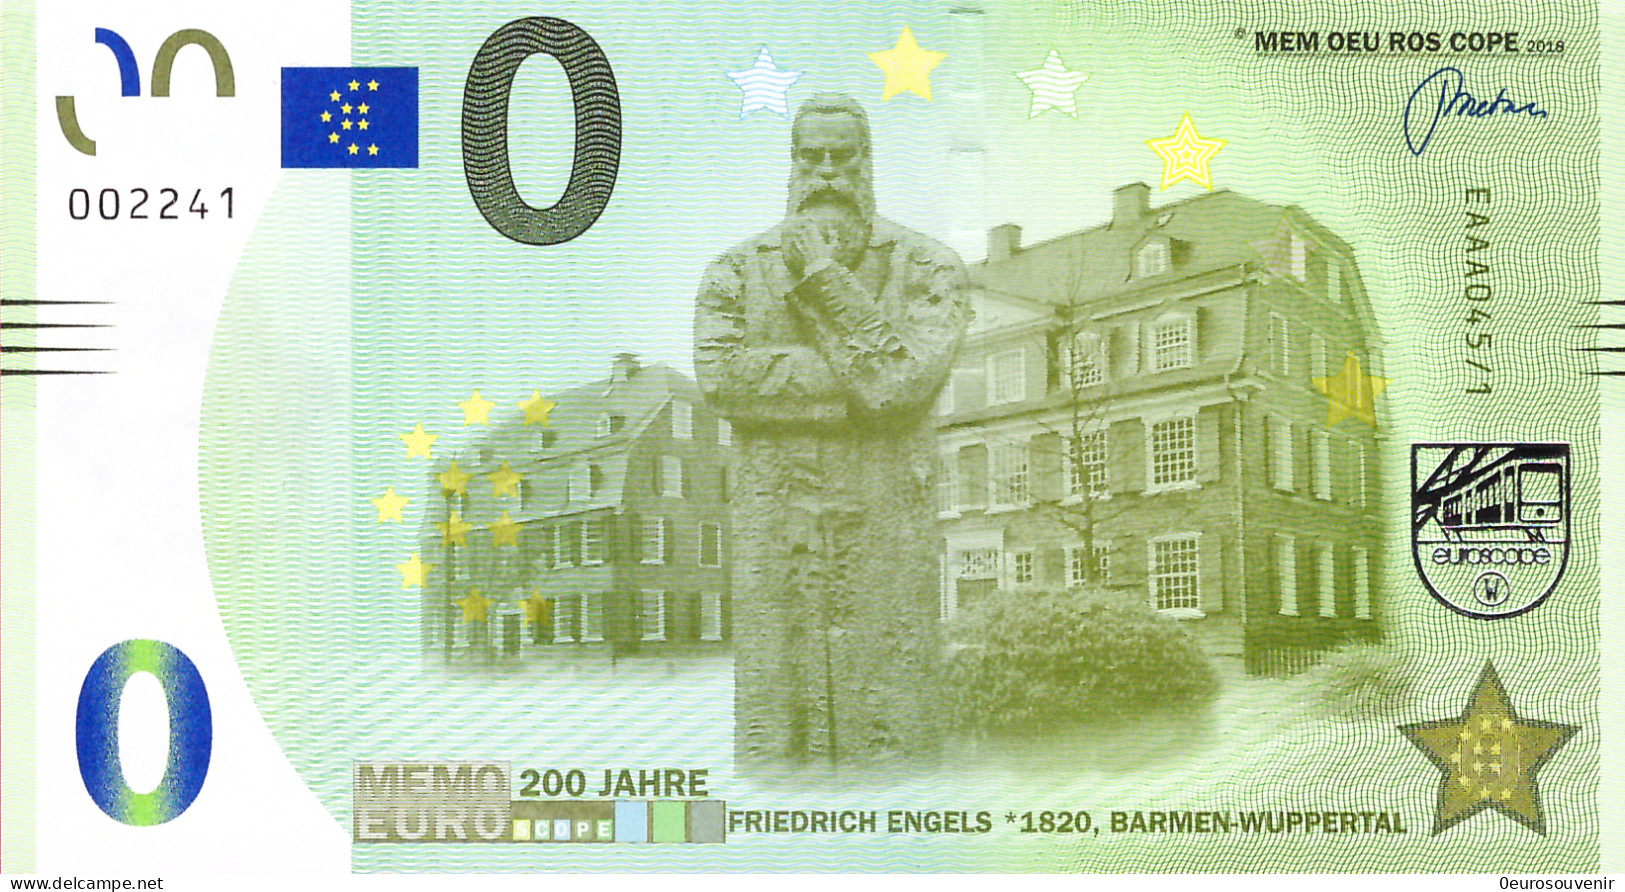 MEMO 0-Euro EAAA 045/1 FRIEDRICH ENGELS *1820 BARMEN-WUPPERTAL - Private Proofs / Unofficial